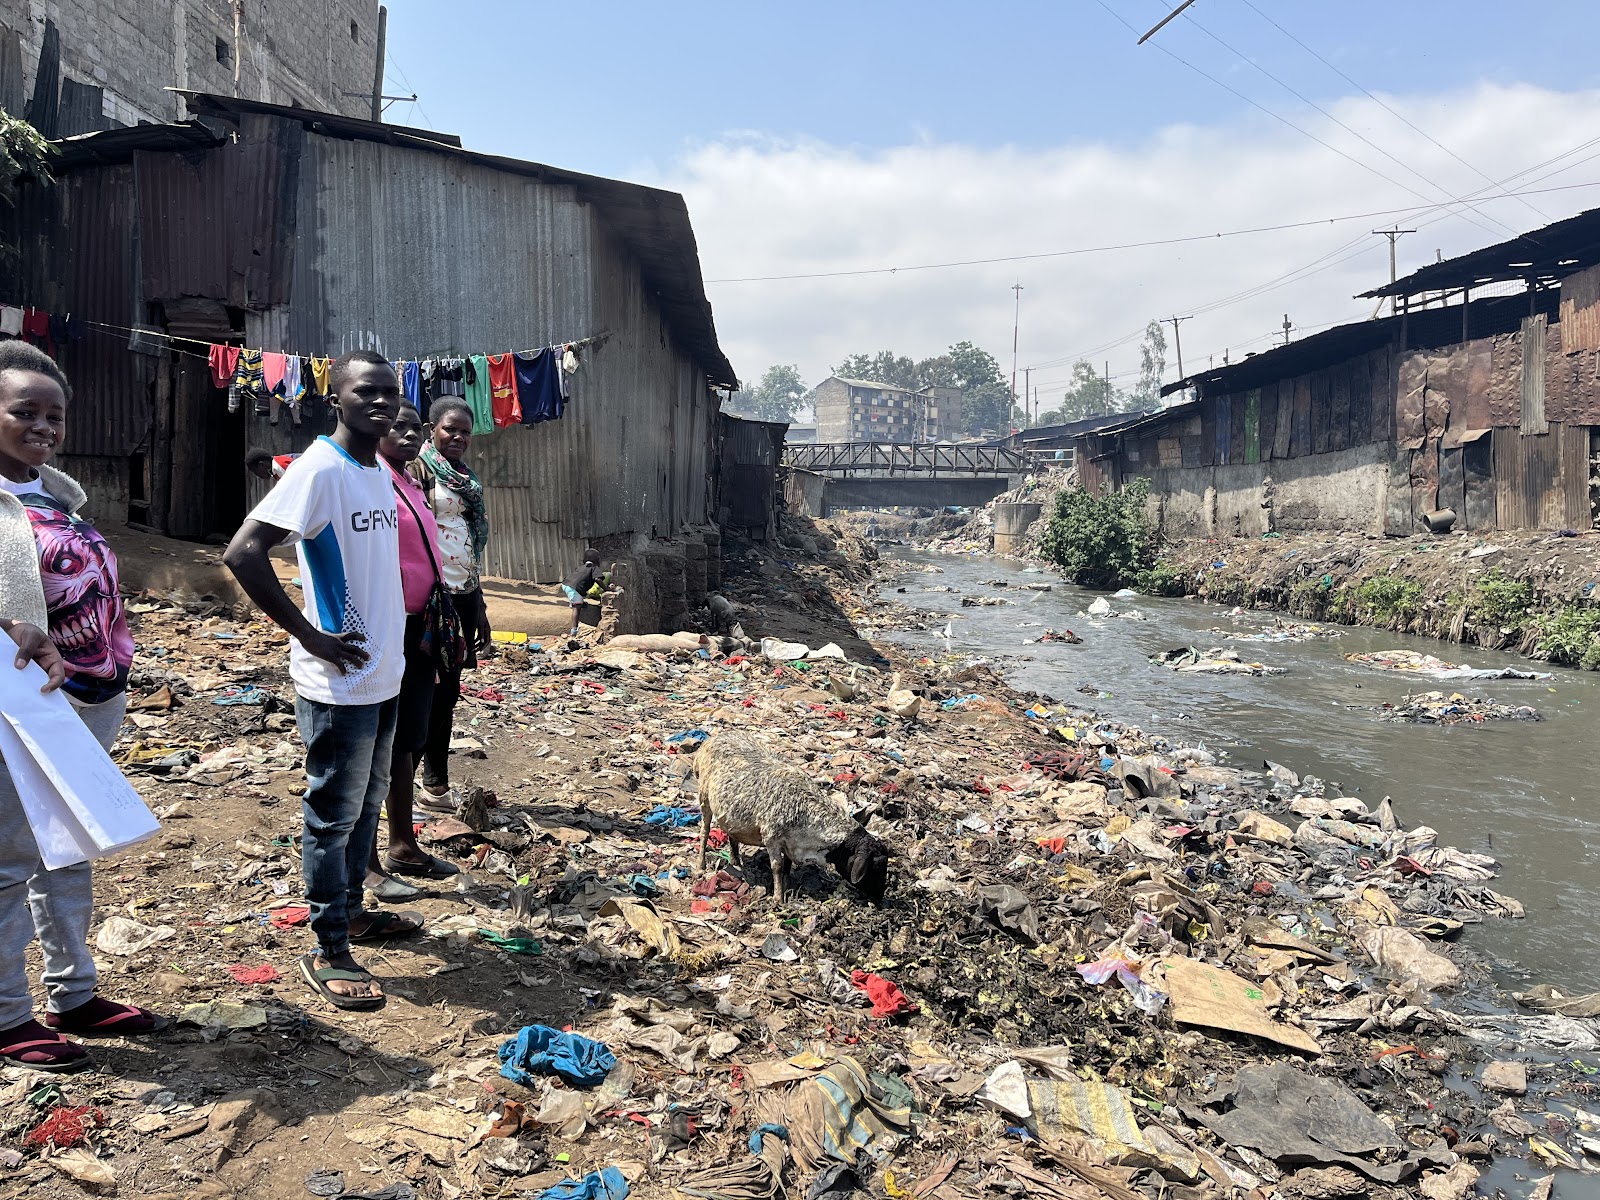 an informal urban area. In the foreground, four individuals are standing alongside a polluted riverbank. All are facing the camera with neutral expressions. The river beside them is littered with waste, and the banks are strewn with trash. Makeshift homes with corrugated metal surfaces and hanging laundry are in the background, and a bridge is visible in the distance. It's a sunny day with a clear blue sky.